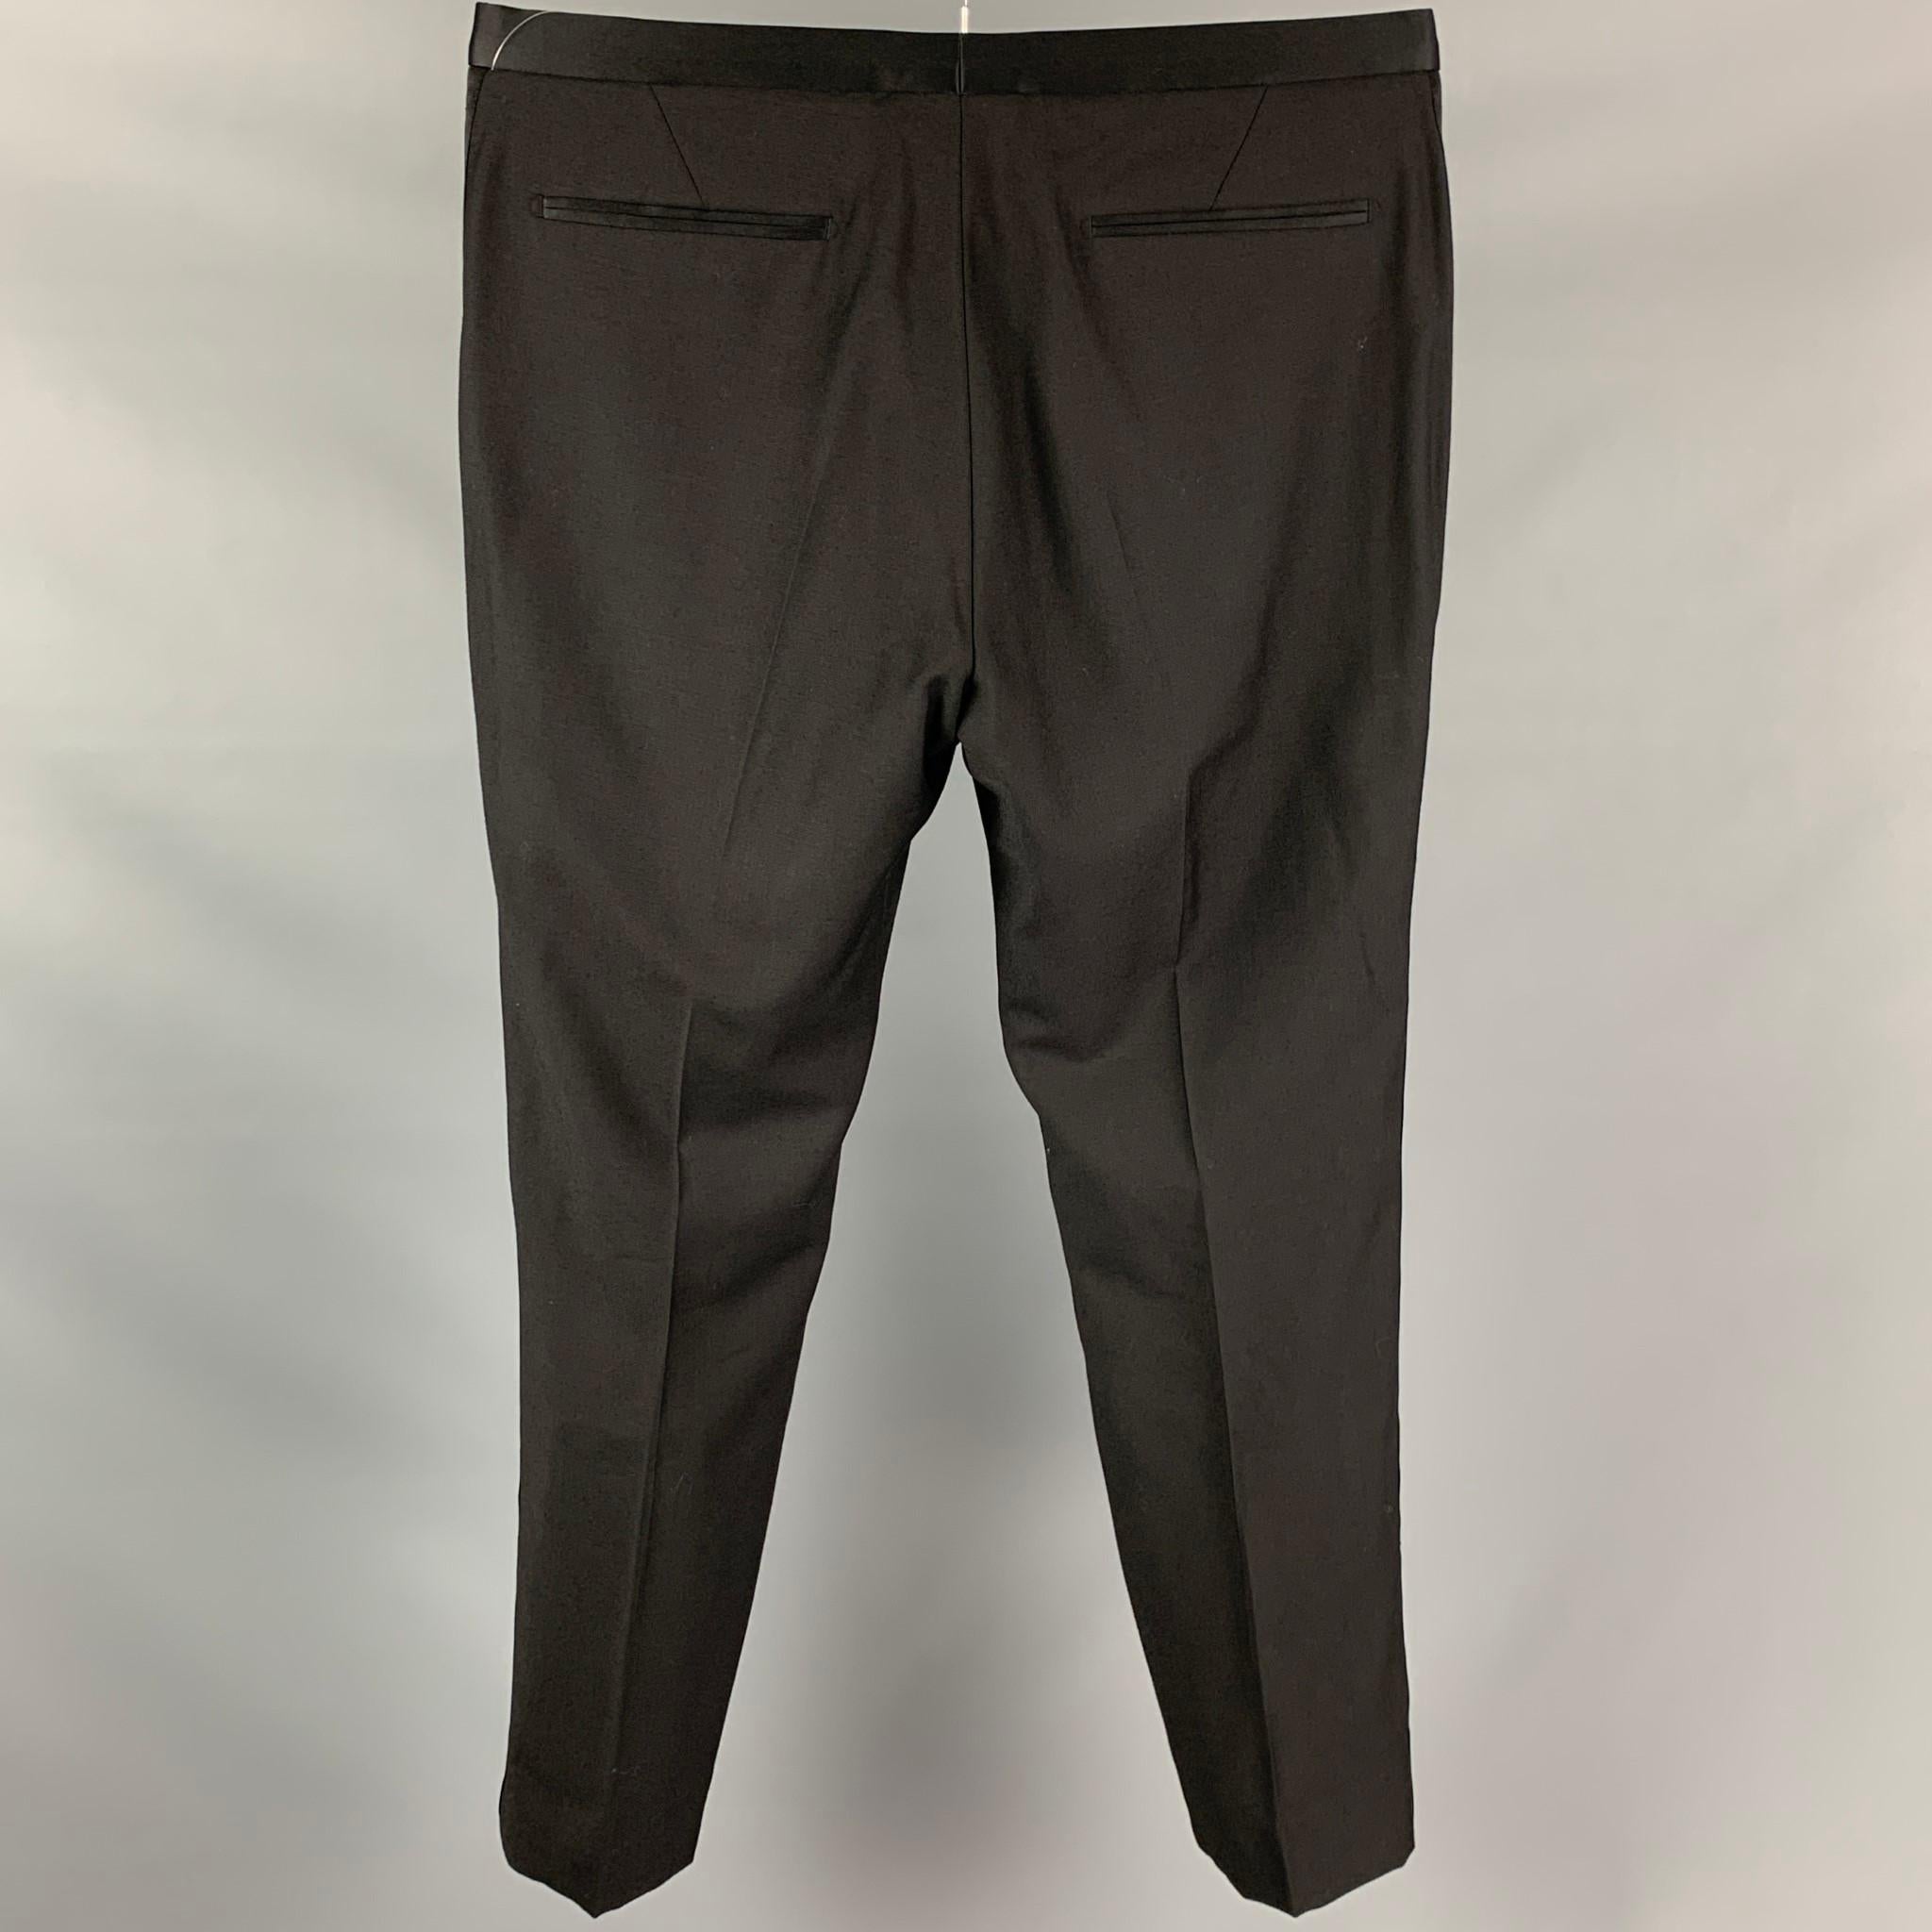 CALVIN KLEIN COLLECTION dress pants comes in a black wool featuring a flat front, slit pockets, front tab, and a zip fly closure.

Very Good Pre-Owned Condition.
Marked: 50/40

Measurements:

Waist: 34 in.
Rise: 10 in.
Inseam: 29 in.   